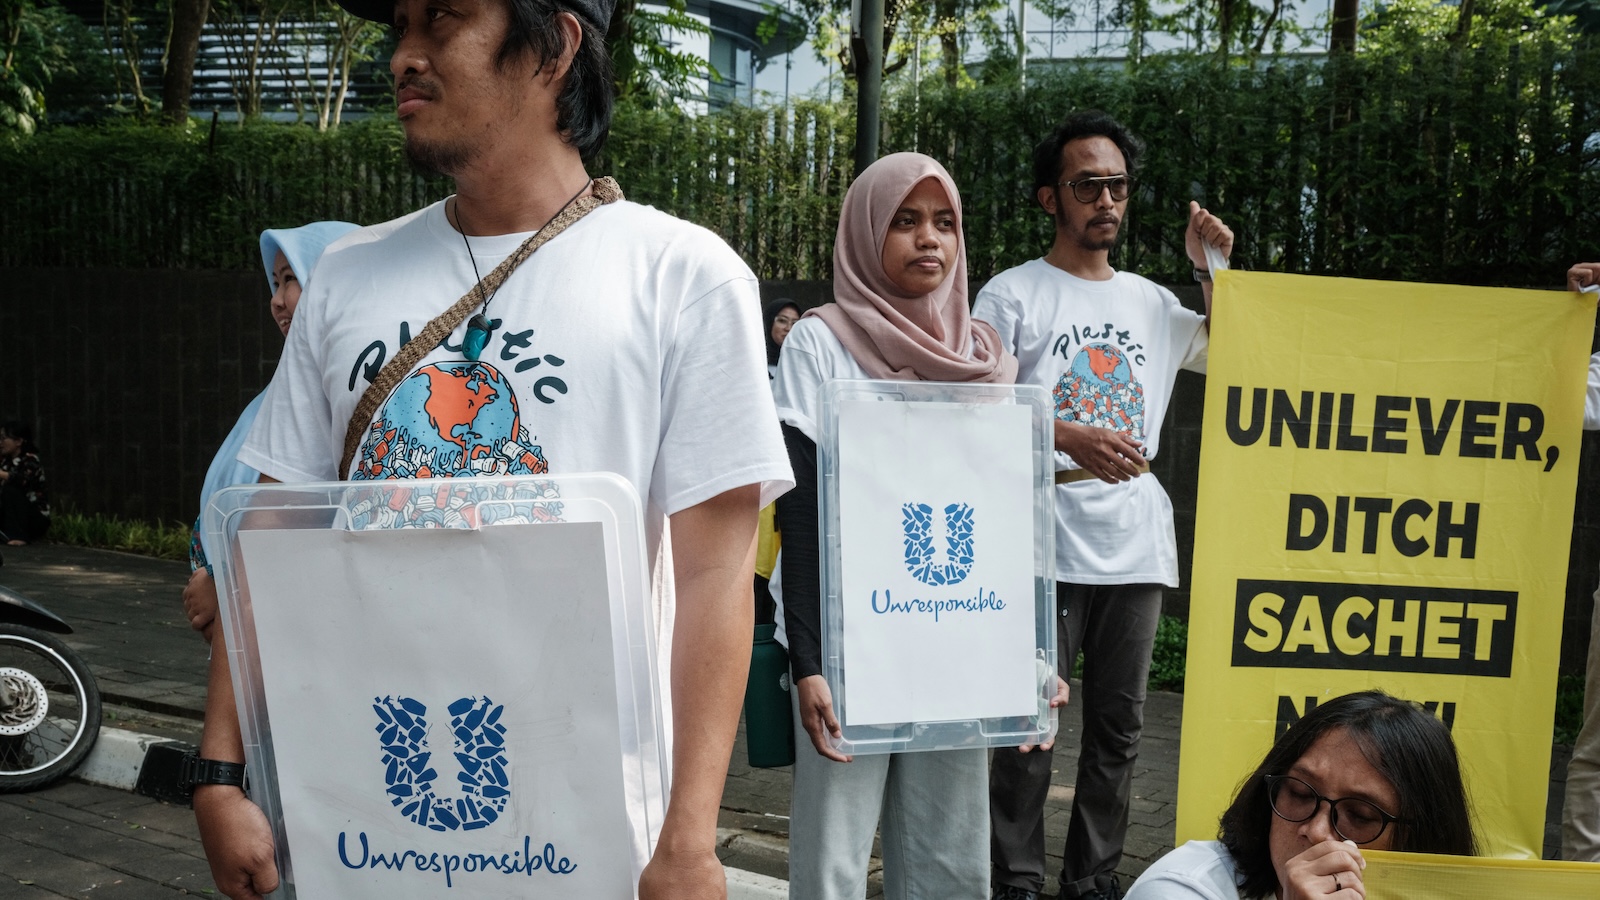 Members of Greenpeace Indonesia stage a protest against the plastic waste generated by Unilever's products outside the company's office in Tangerang, a suburb of Jakarta, on June 20.